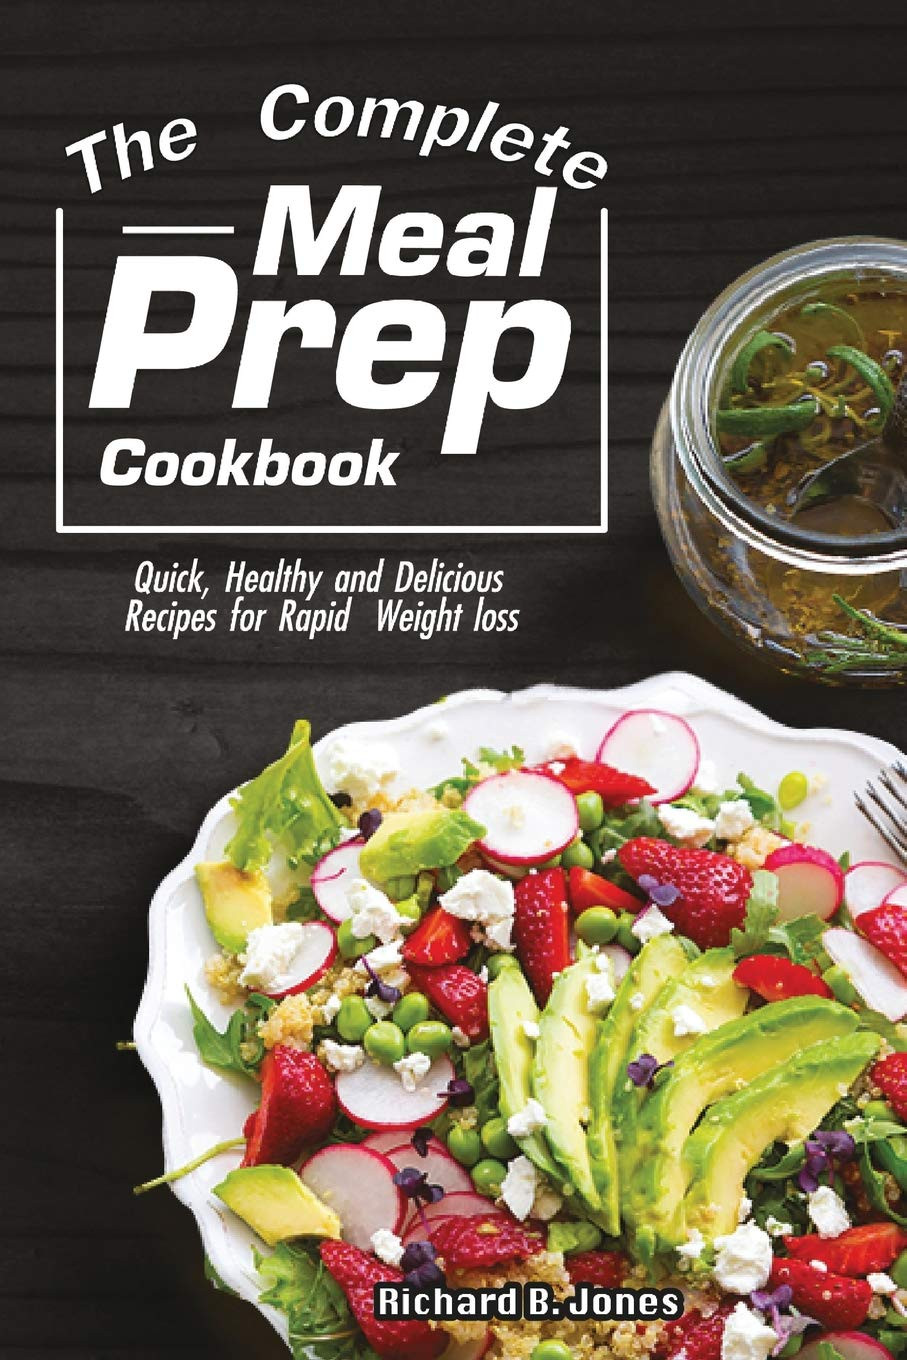 Quick Weight Loss Meal Prep
 Download The plete Meal Prep Cookbook Quick Healthy